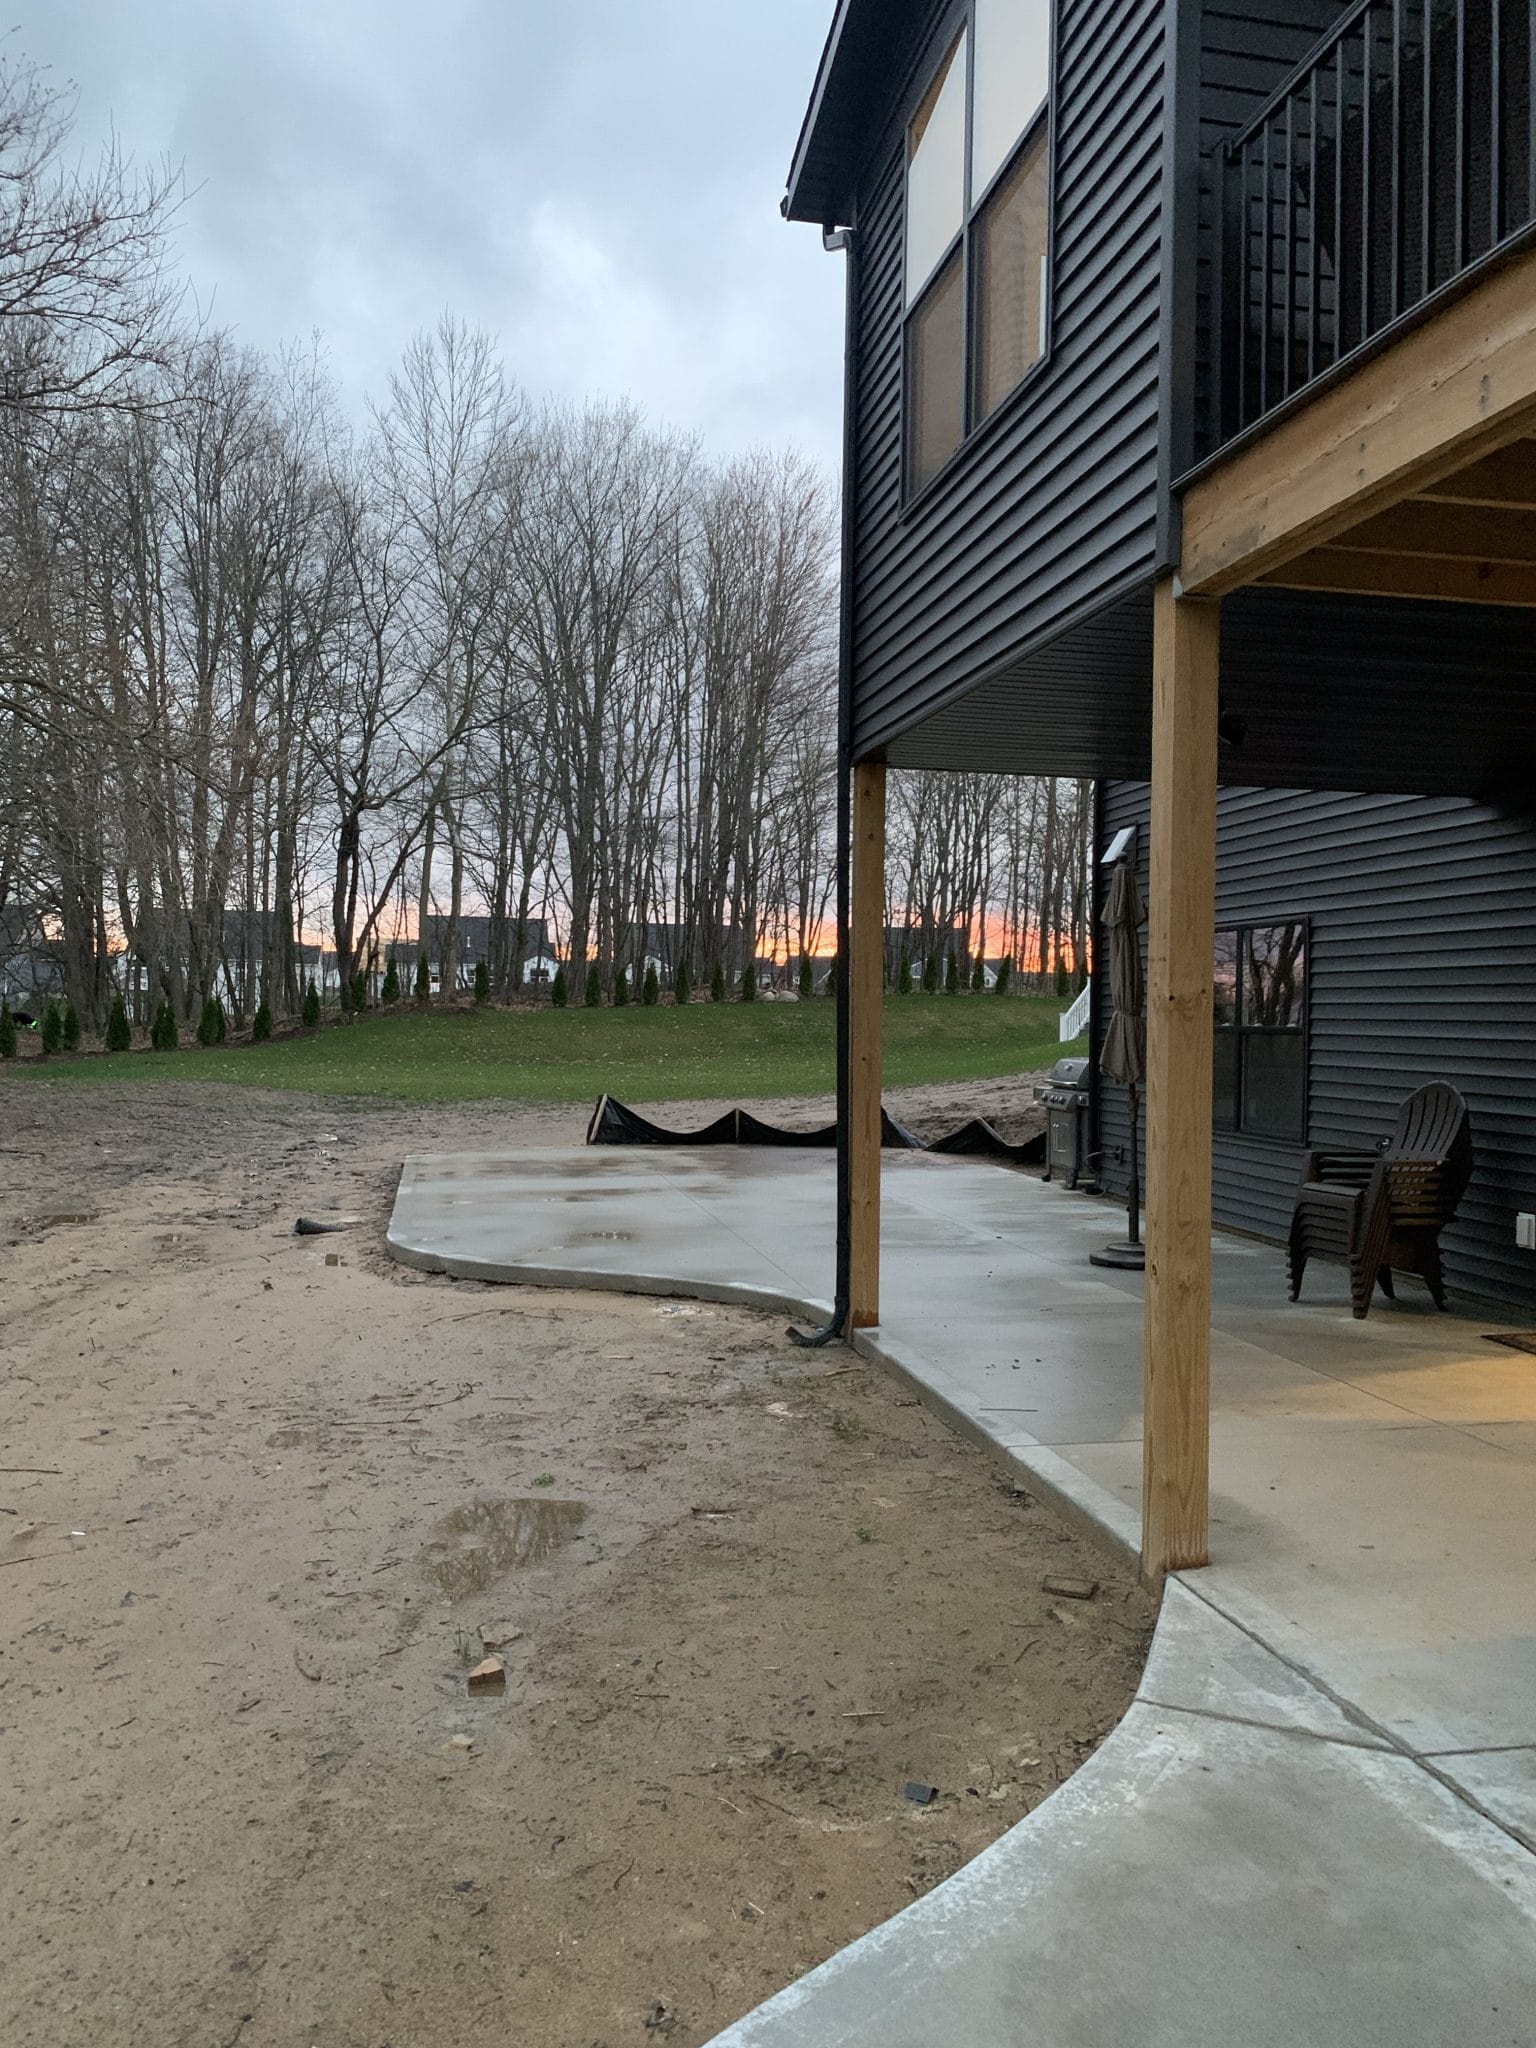 New Construction, Michigan sunsets, backyard planning, Stilettos and Diapers